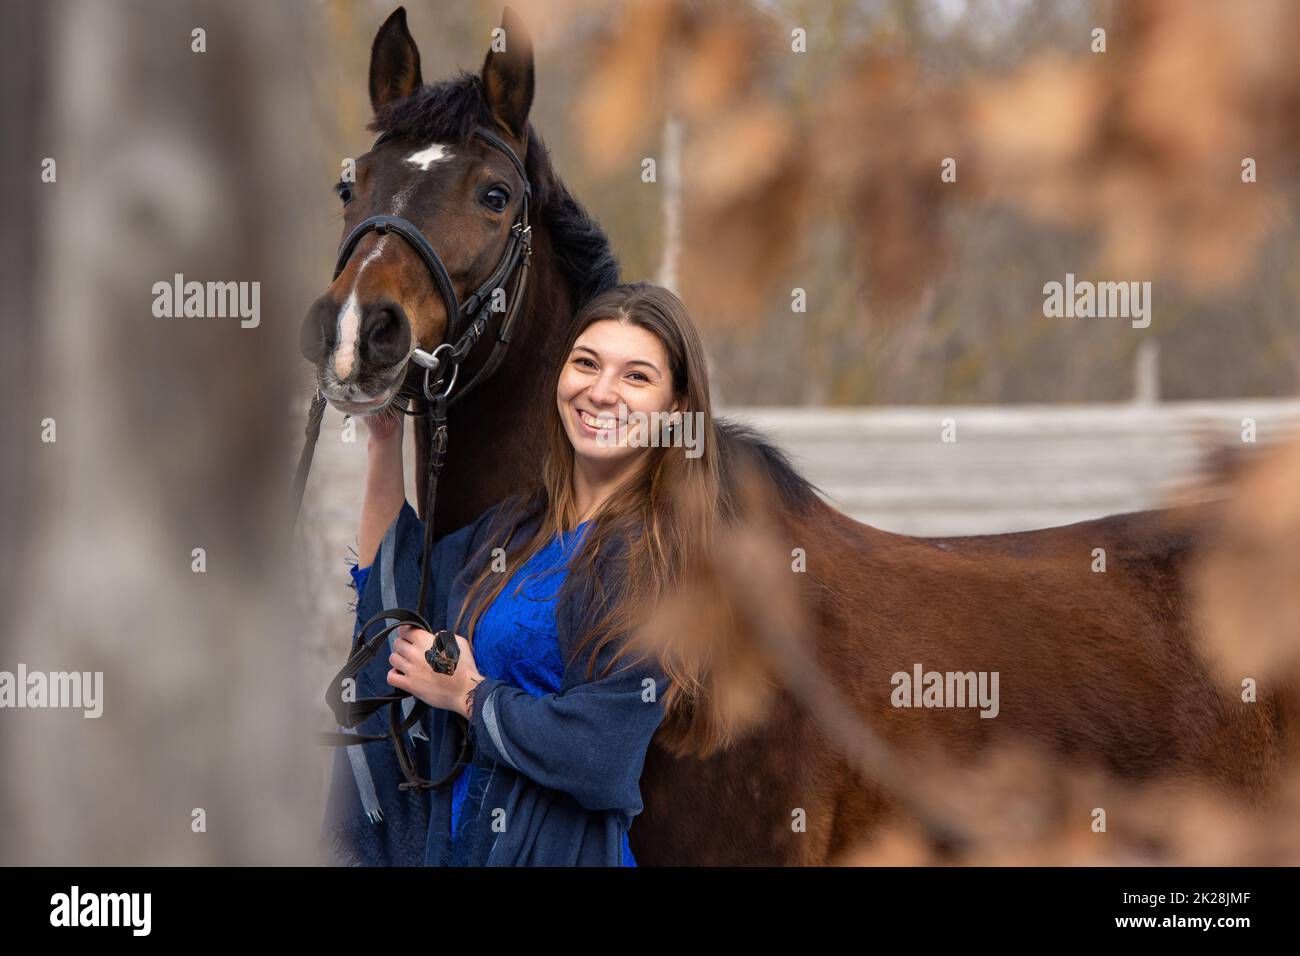 Portrait of a happy beautiful girl of Slavic appearance and a horse Stock Photo